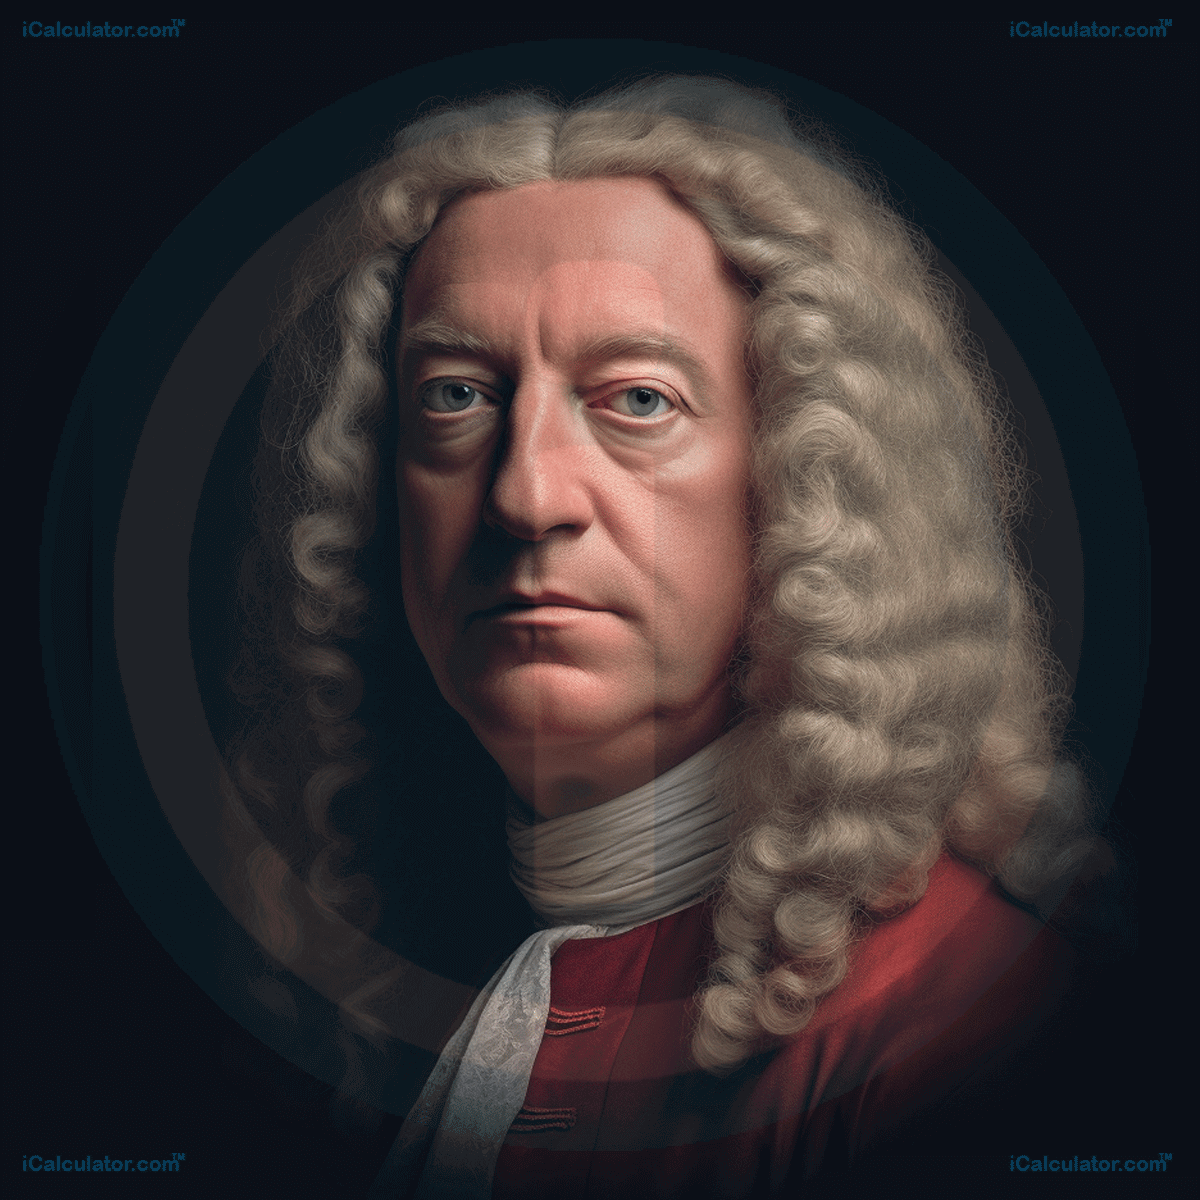 This image shows the physists Daniel Bernoulli, a renowned scientist who advanced the world of phyics. Daniel Bernoulli: The Mastermind of Fluid Dynamics and Statistical Mathematics